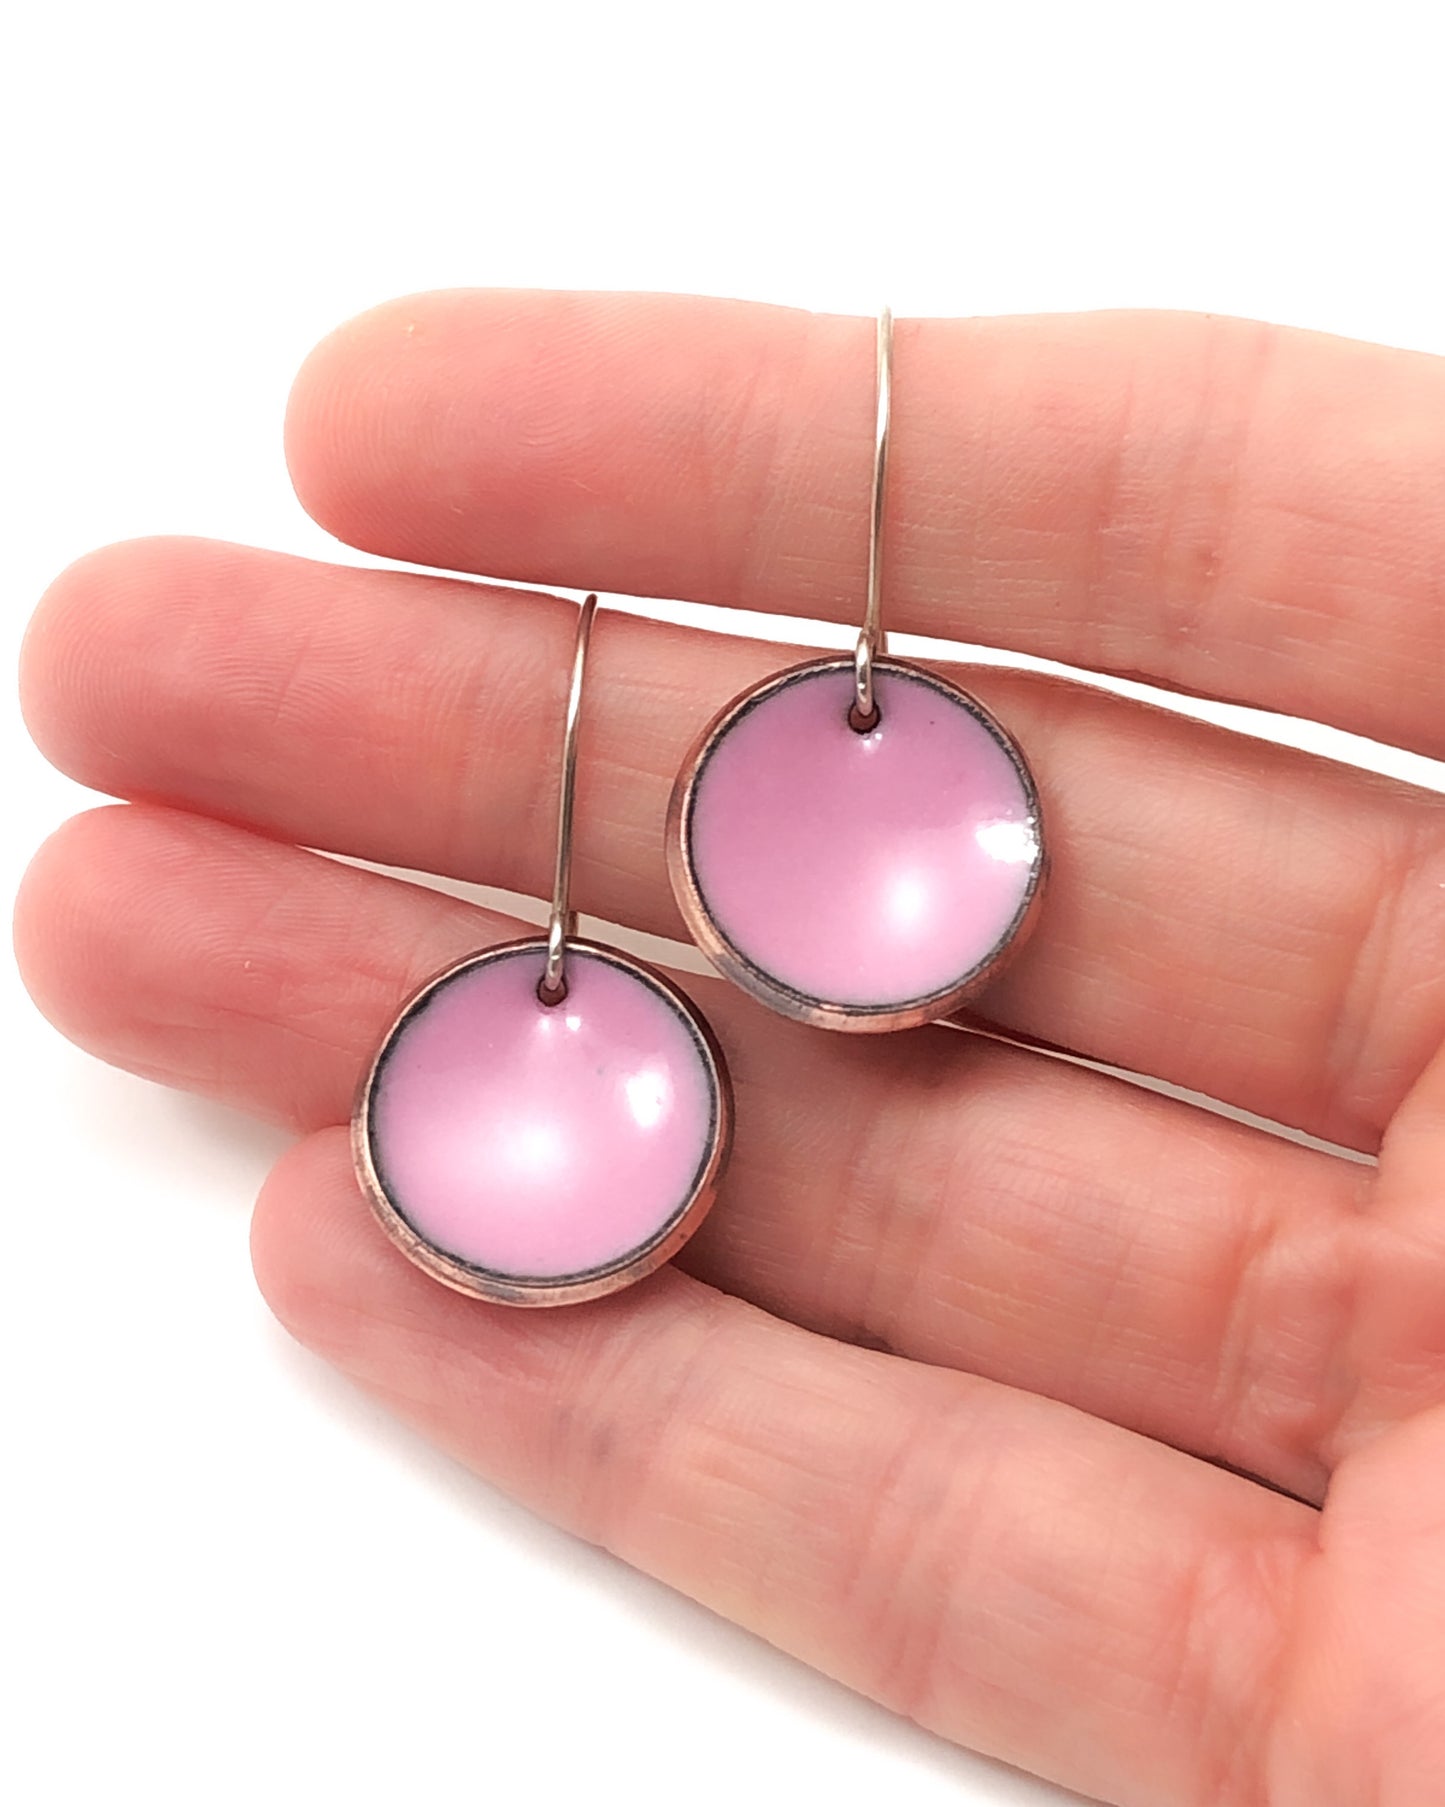 a pair of pink earrings on a person's hand